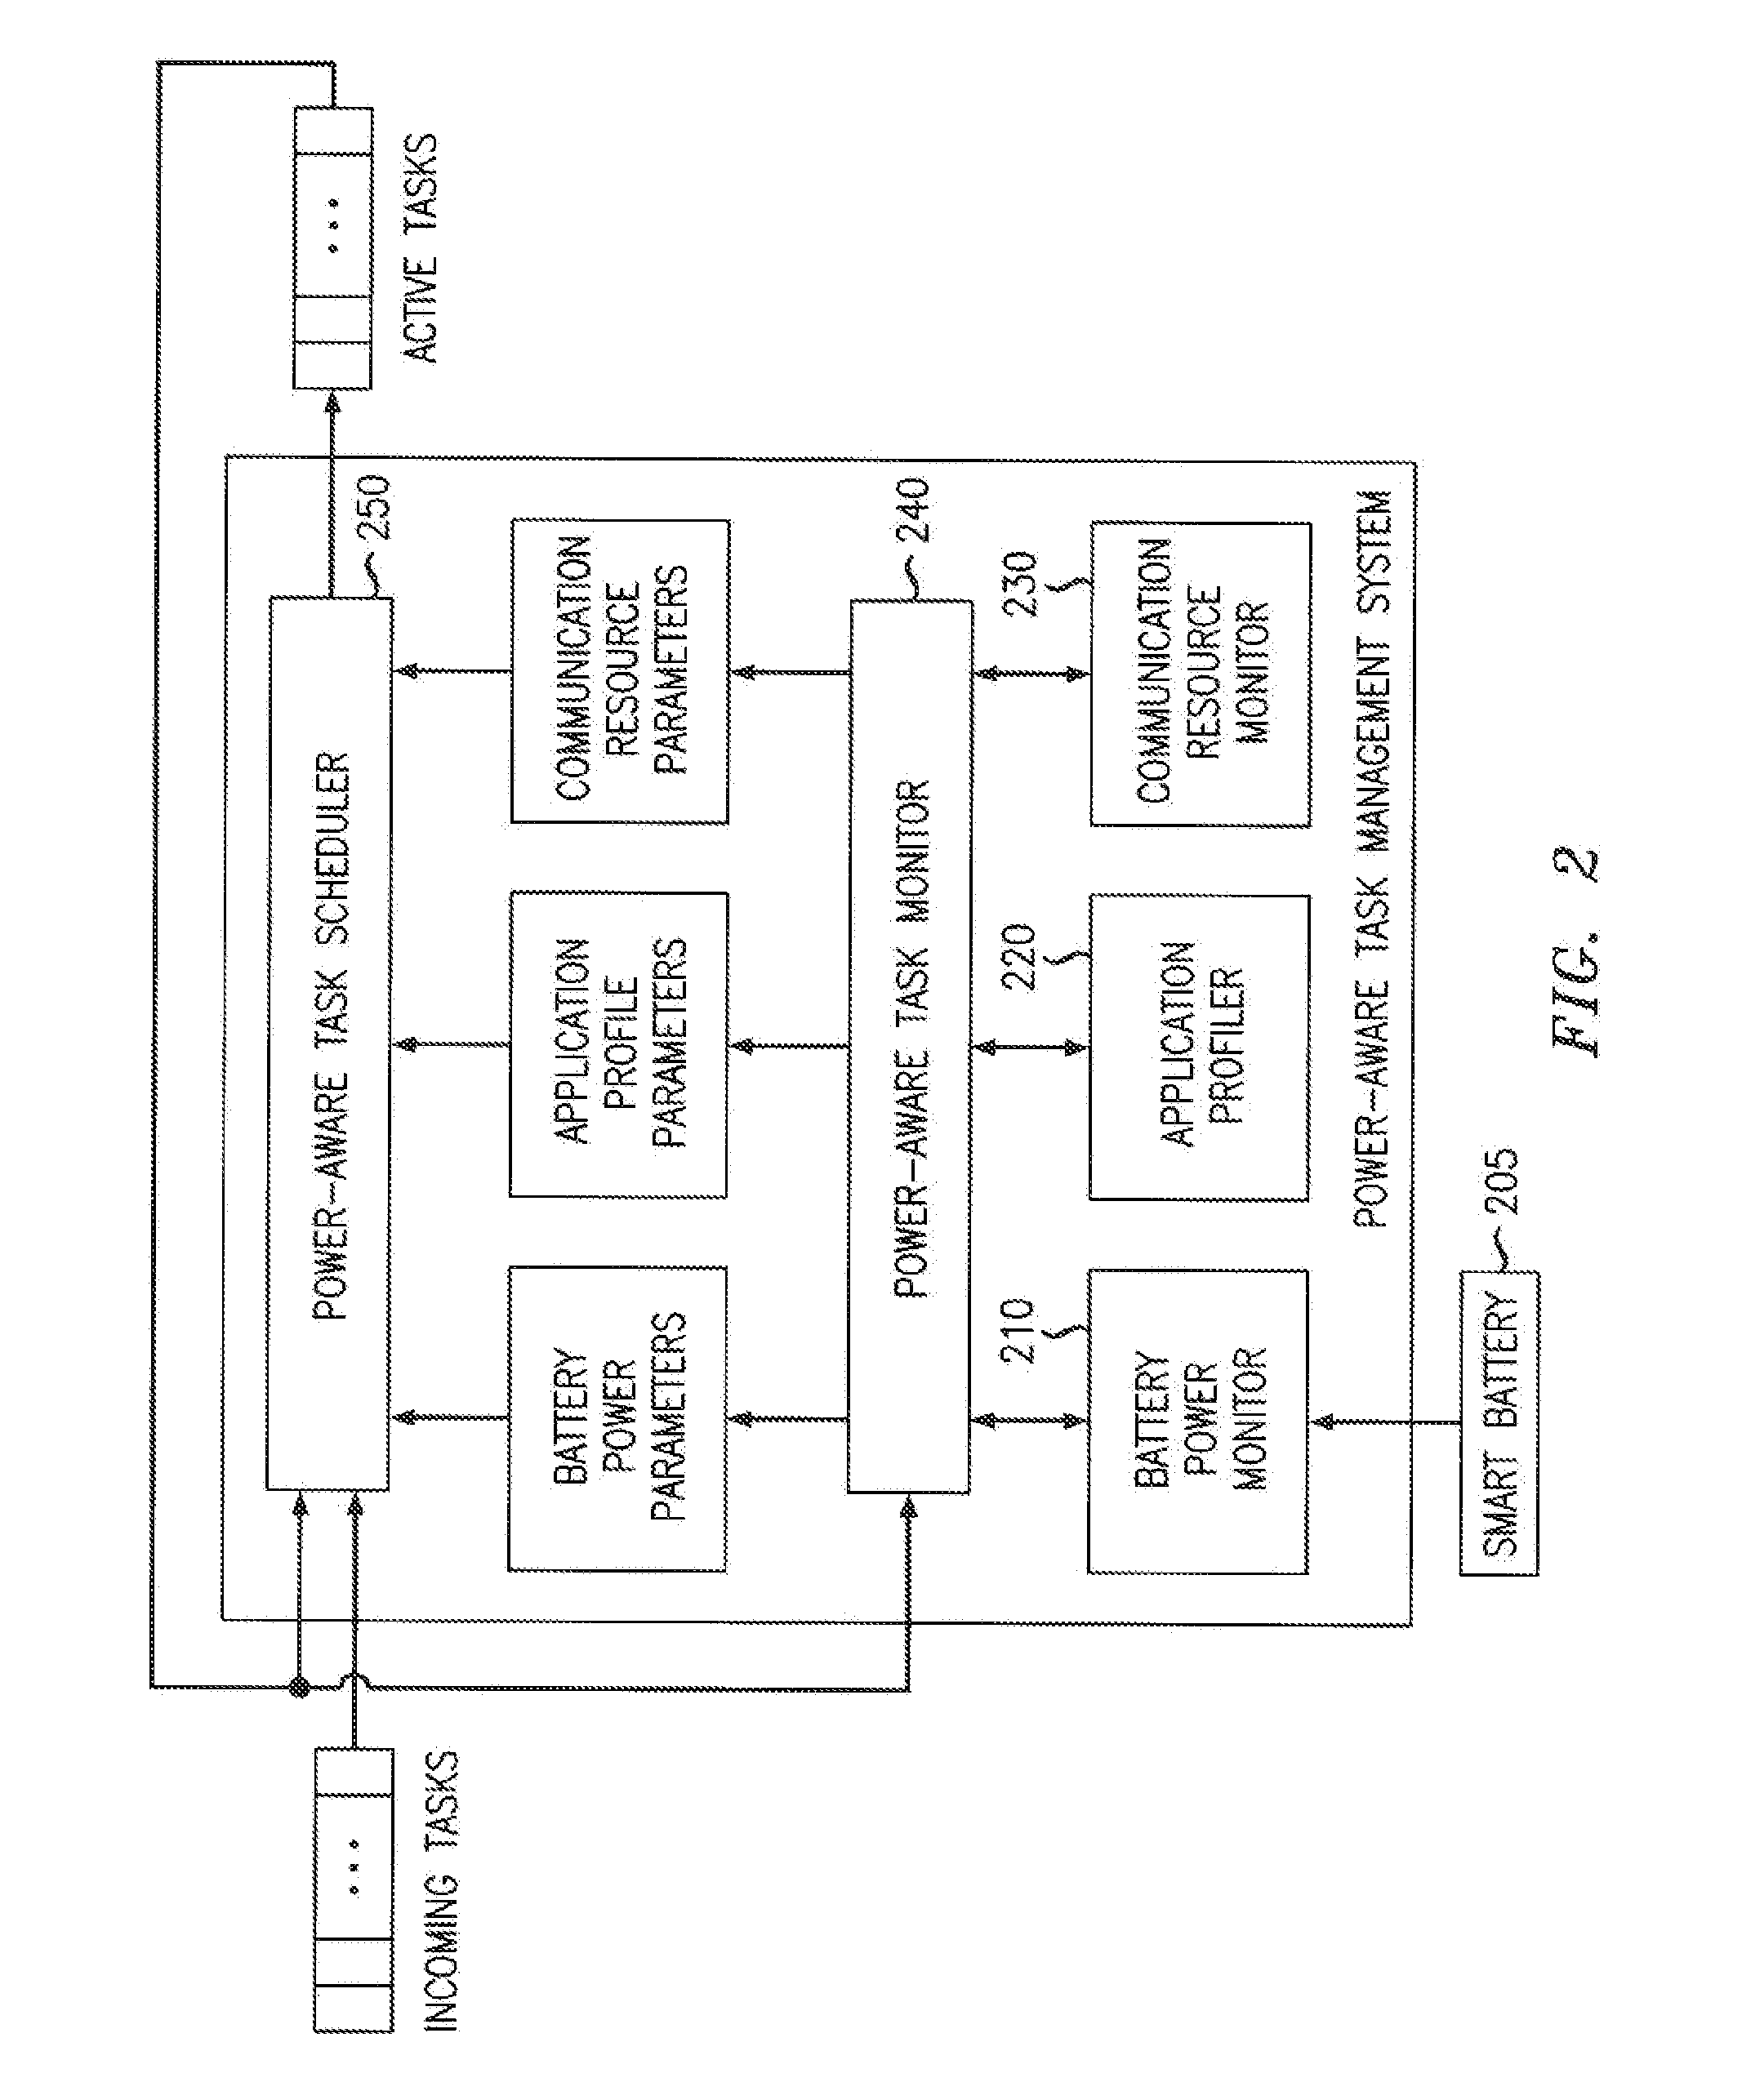 Method And Apparatus Of Smart Power Management For Mobile Communication Terminals Using Power Thresholds